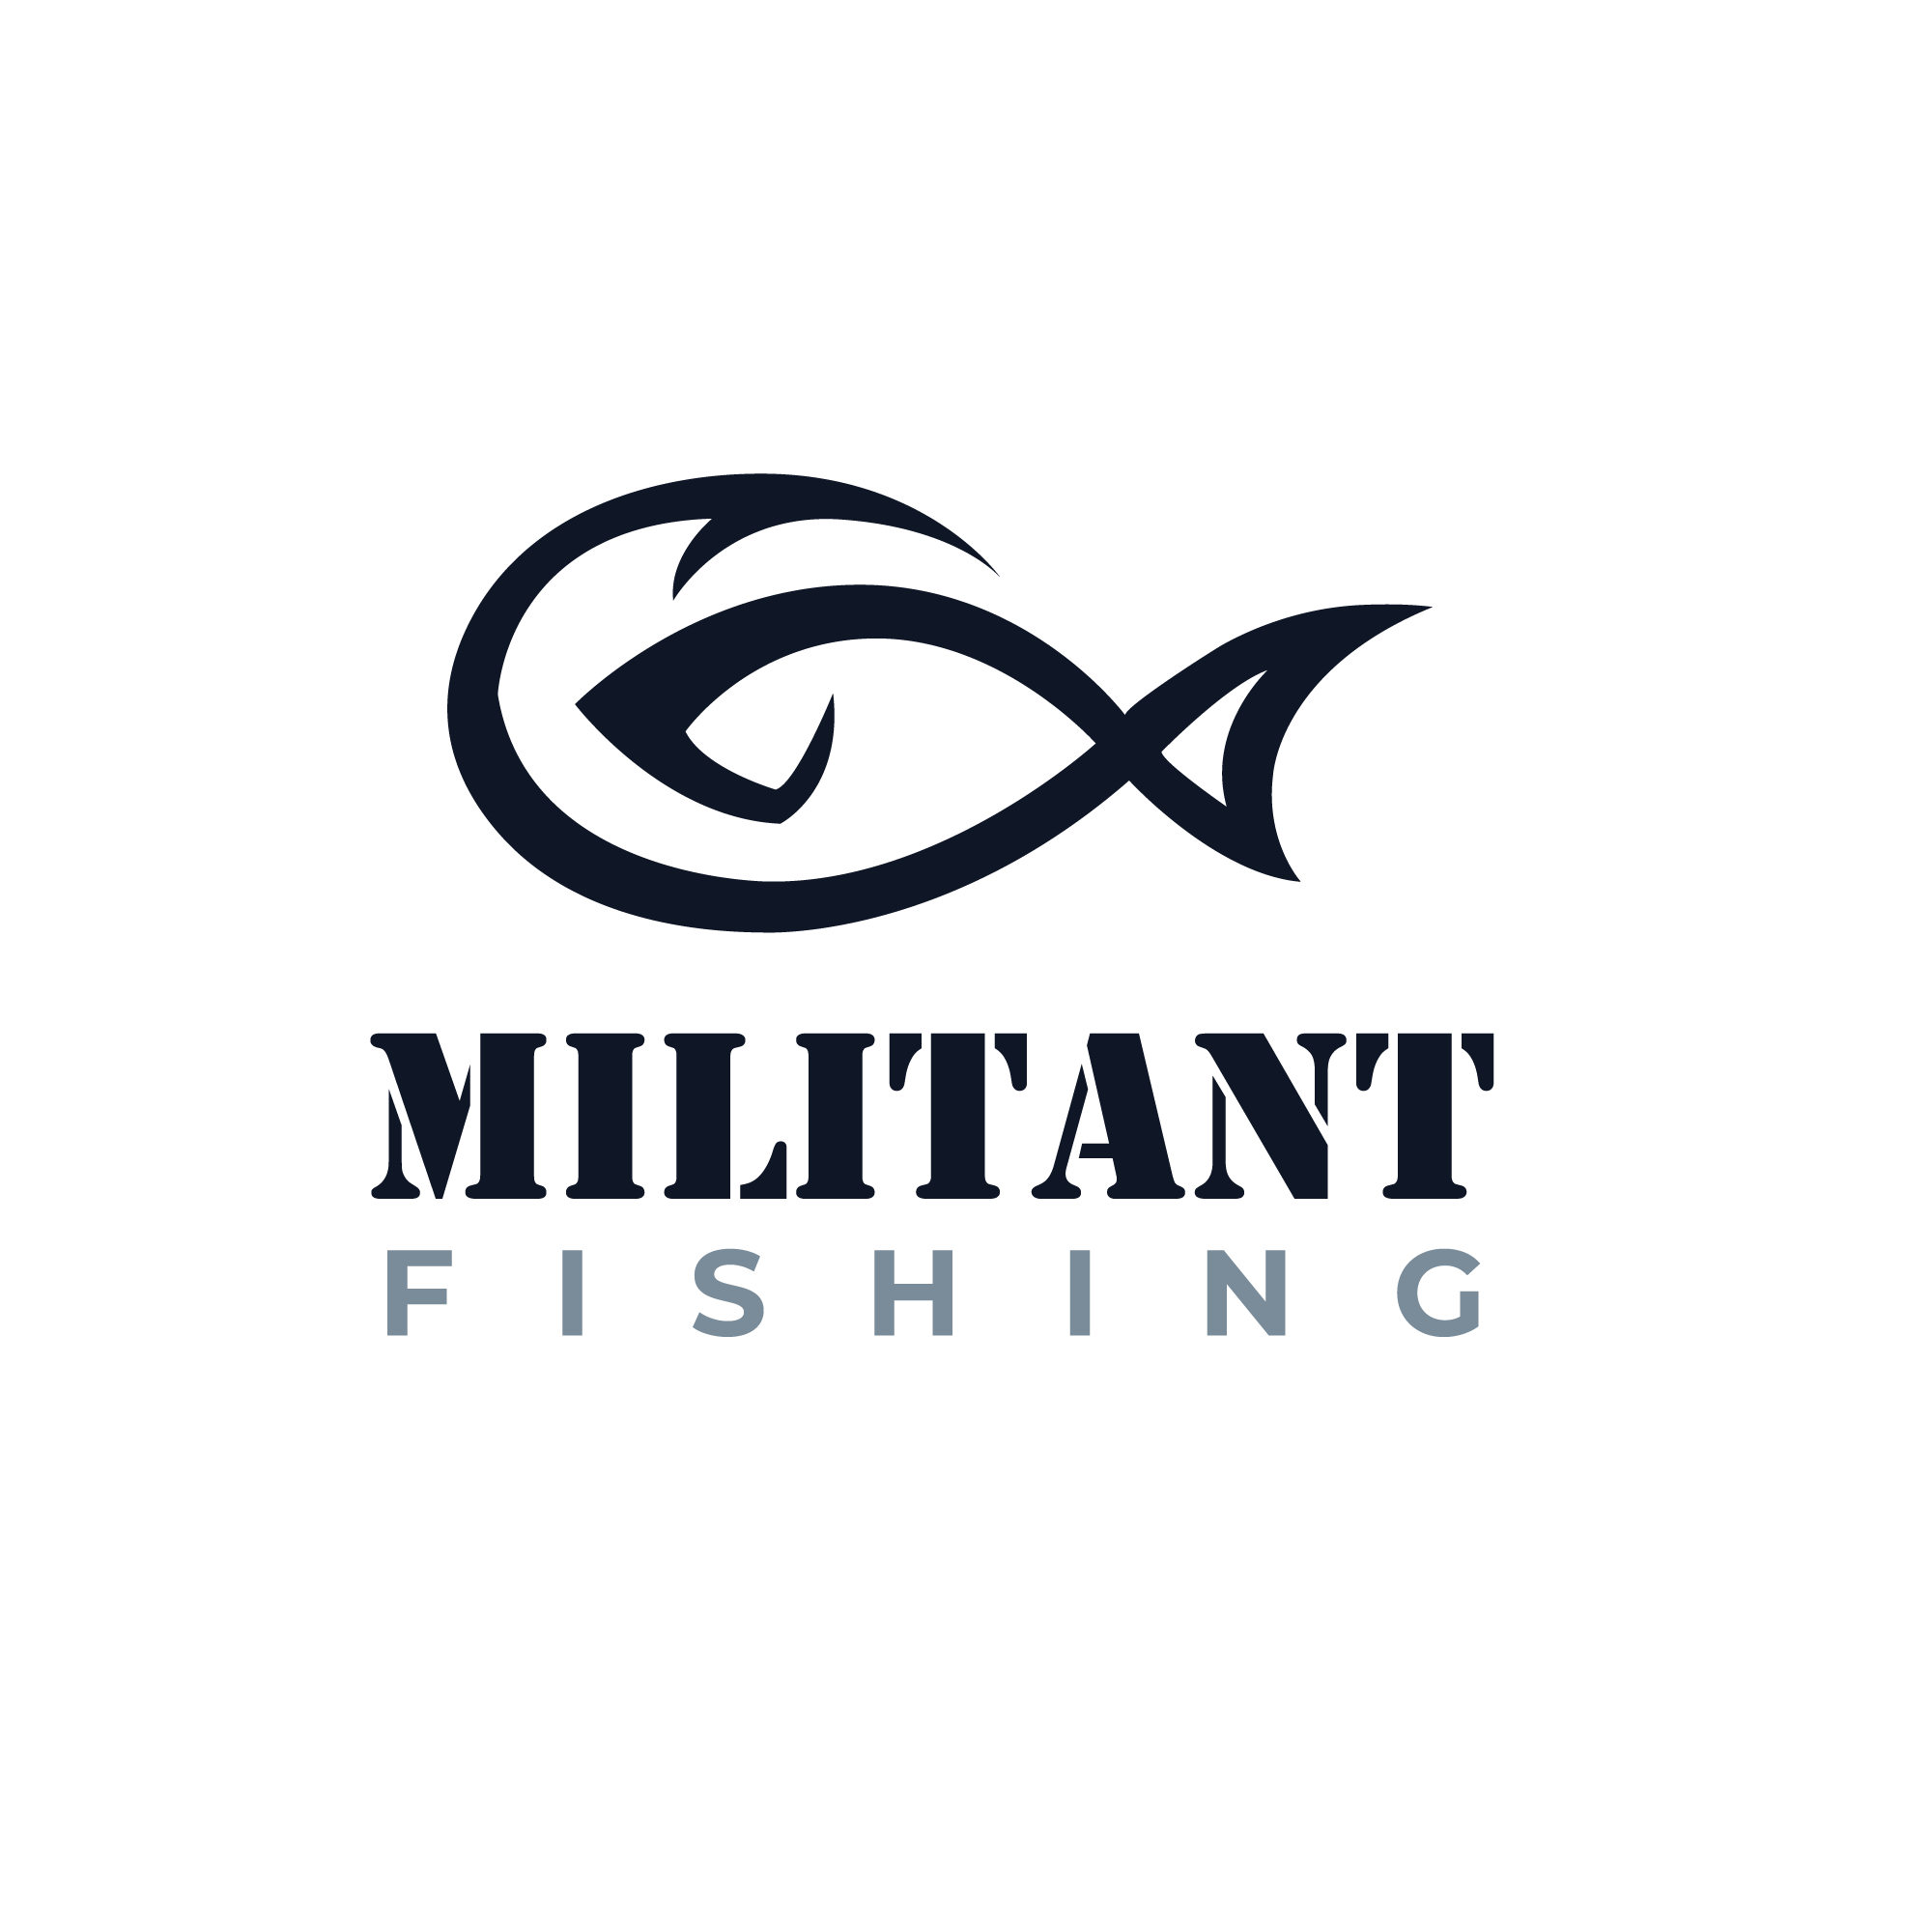 Militant Fishing is a one stop hub where Military Veterans can come to find organizations that provide Therapeutic Fishing, Hunting trips and anything outdoors.